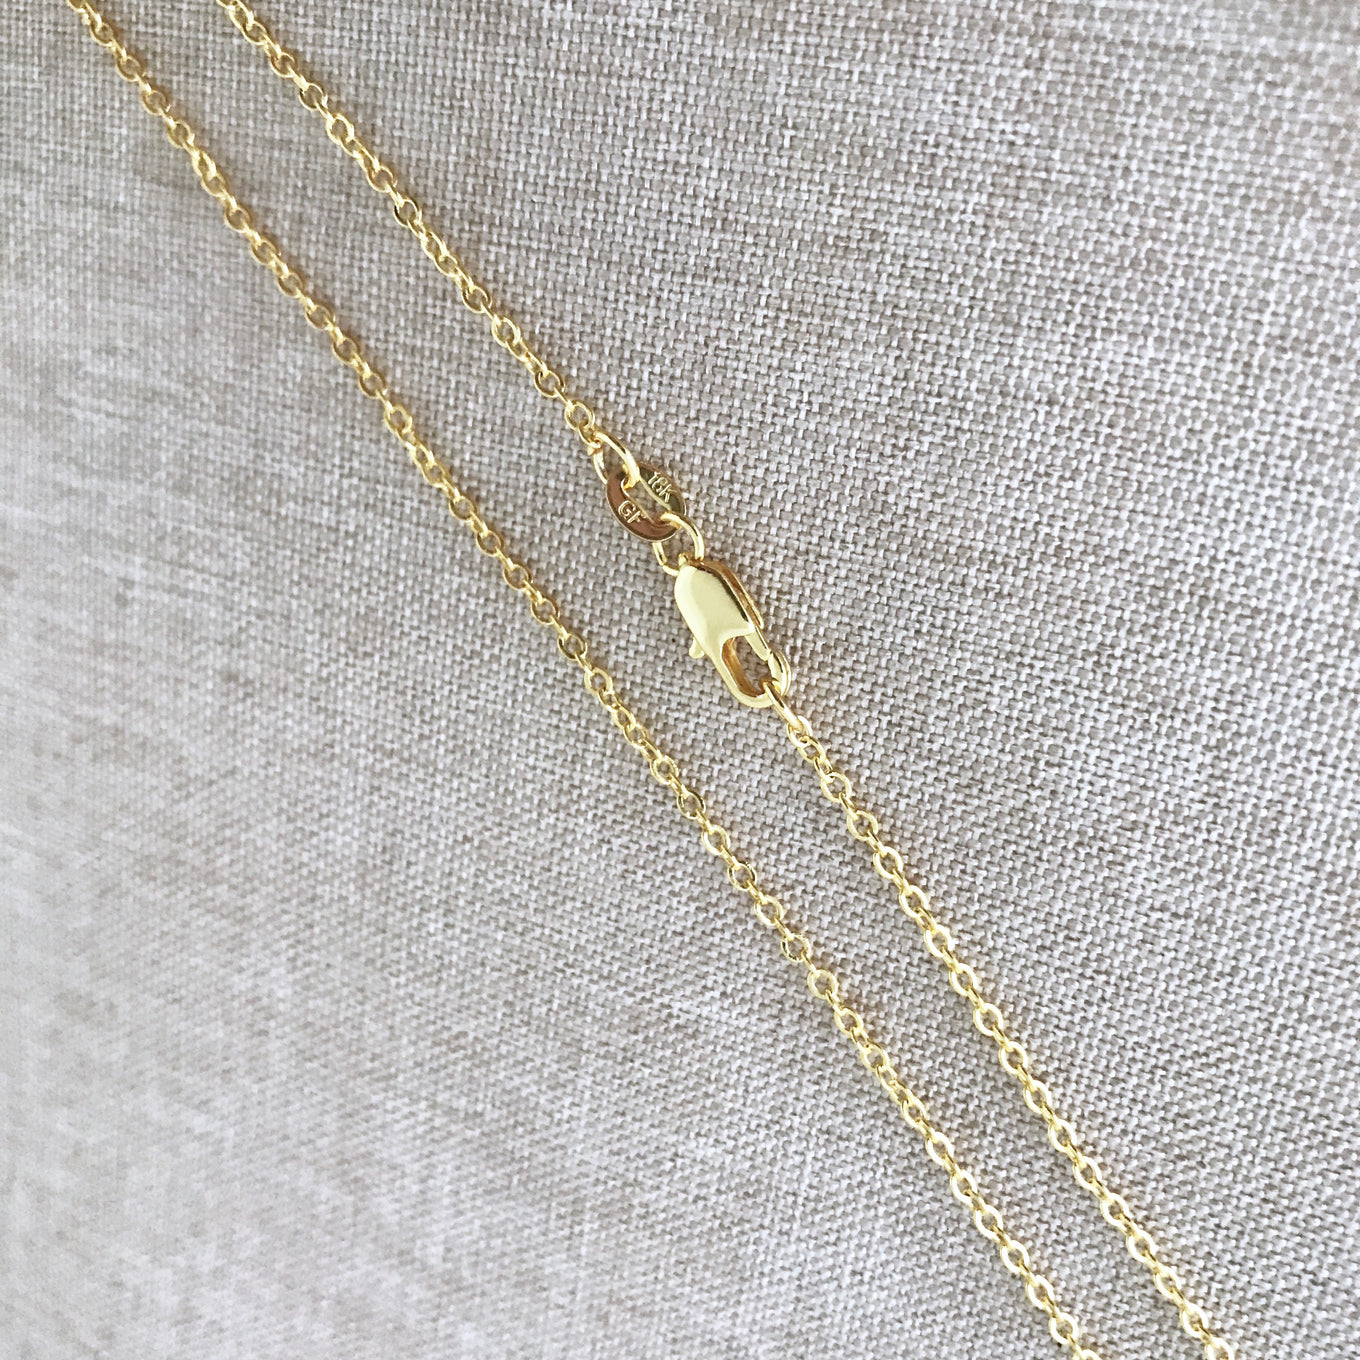 Chain - 1 mm Gold Filled Cable Chain - Adjustable to 21 inches